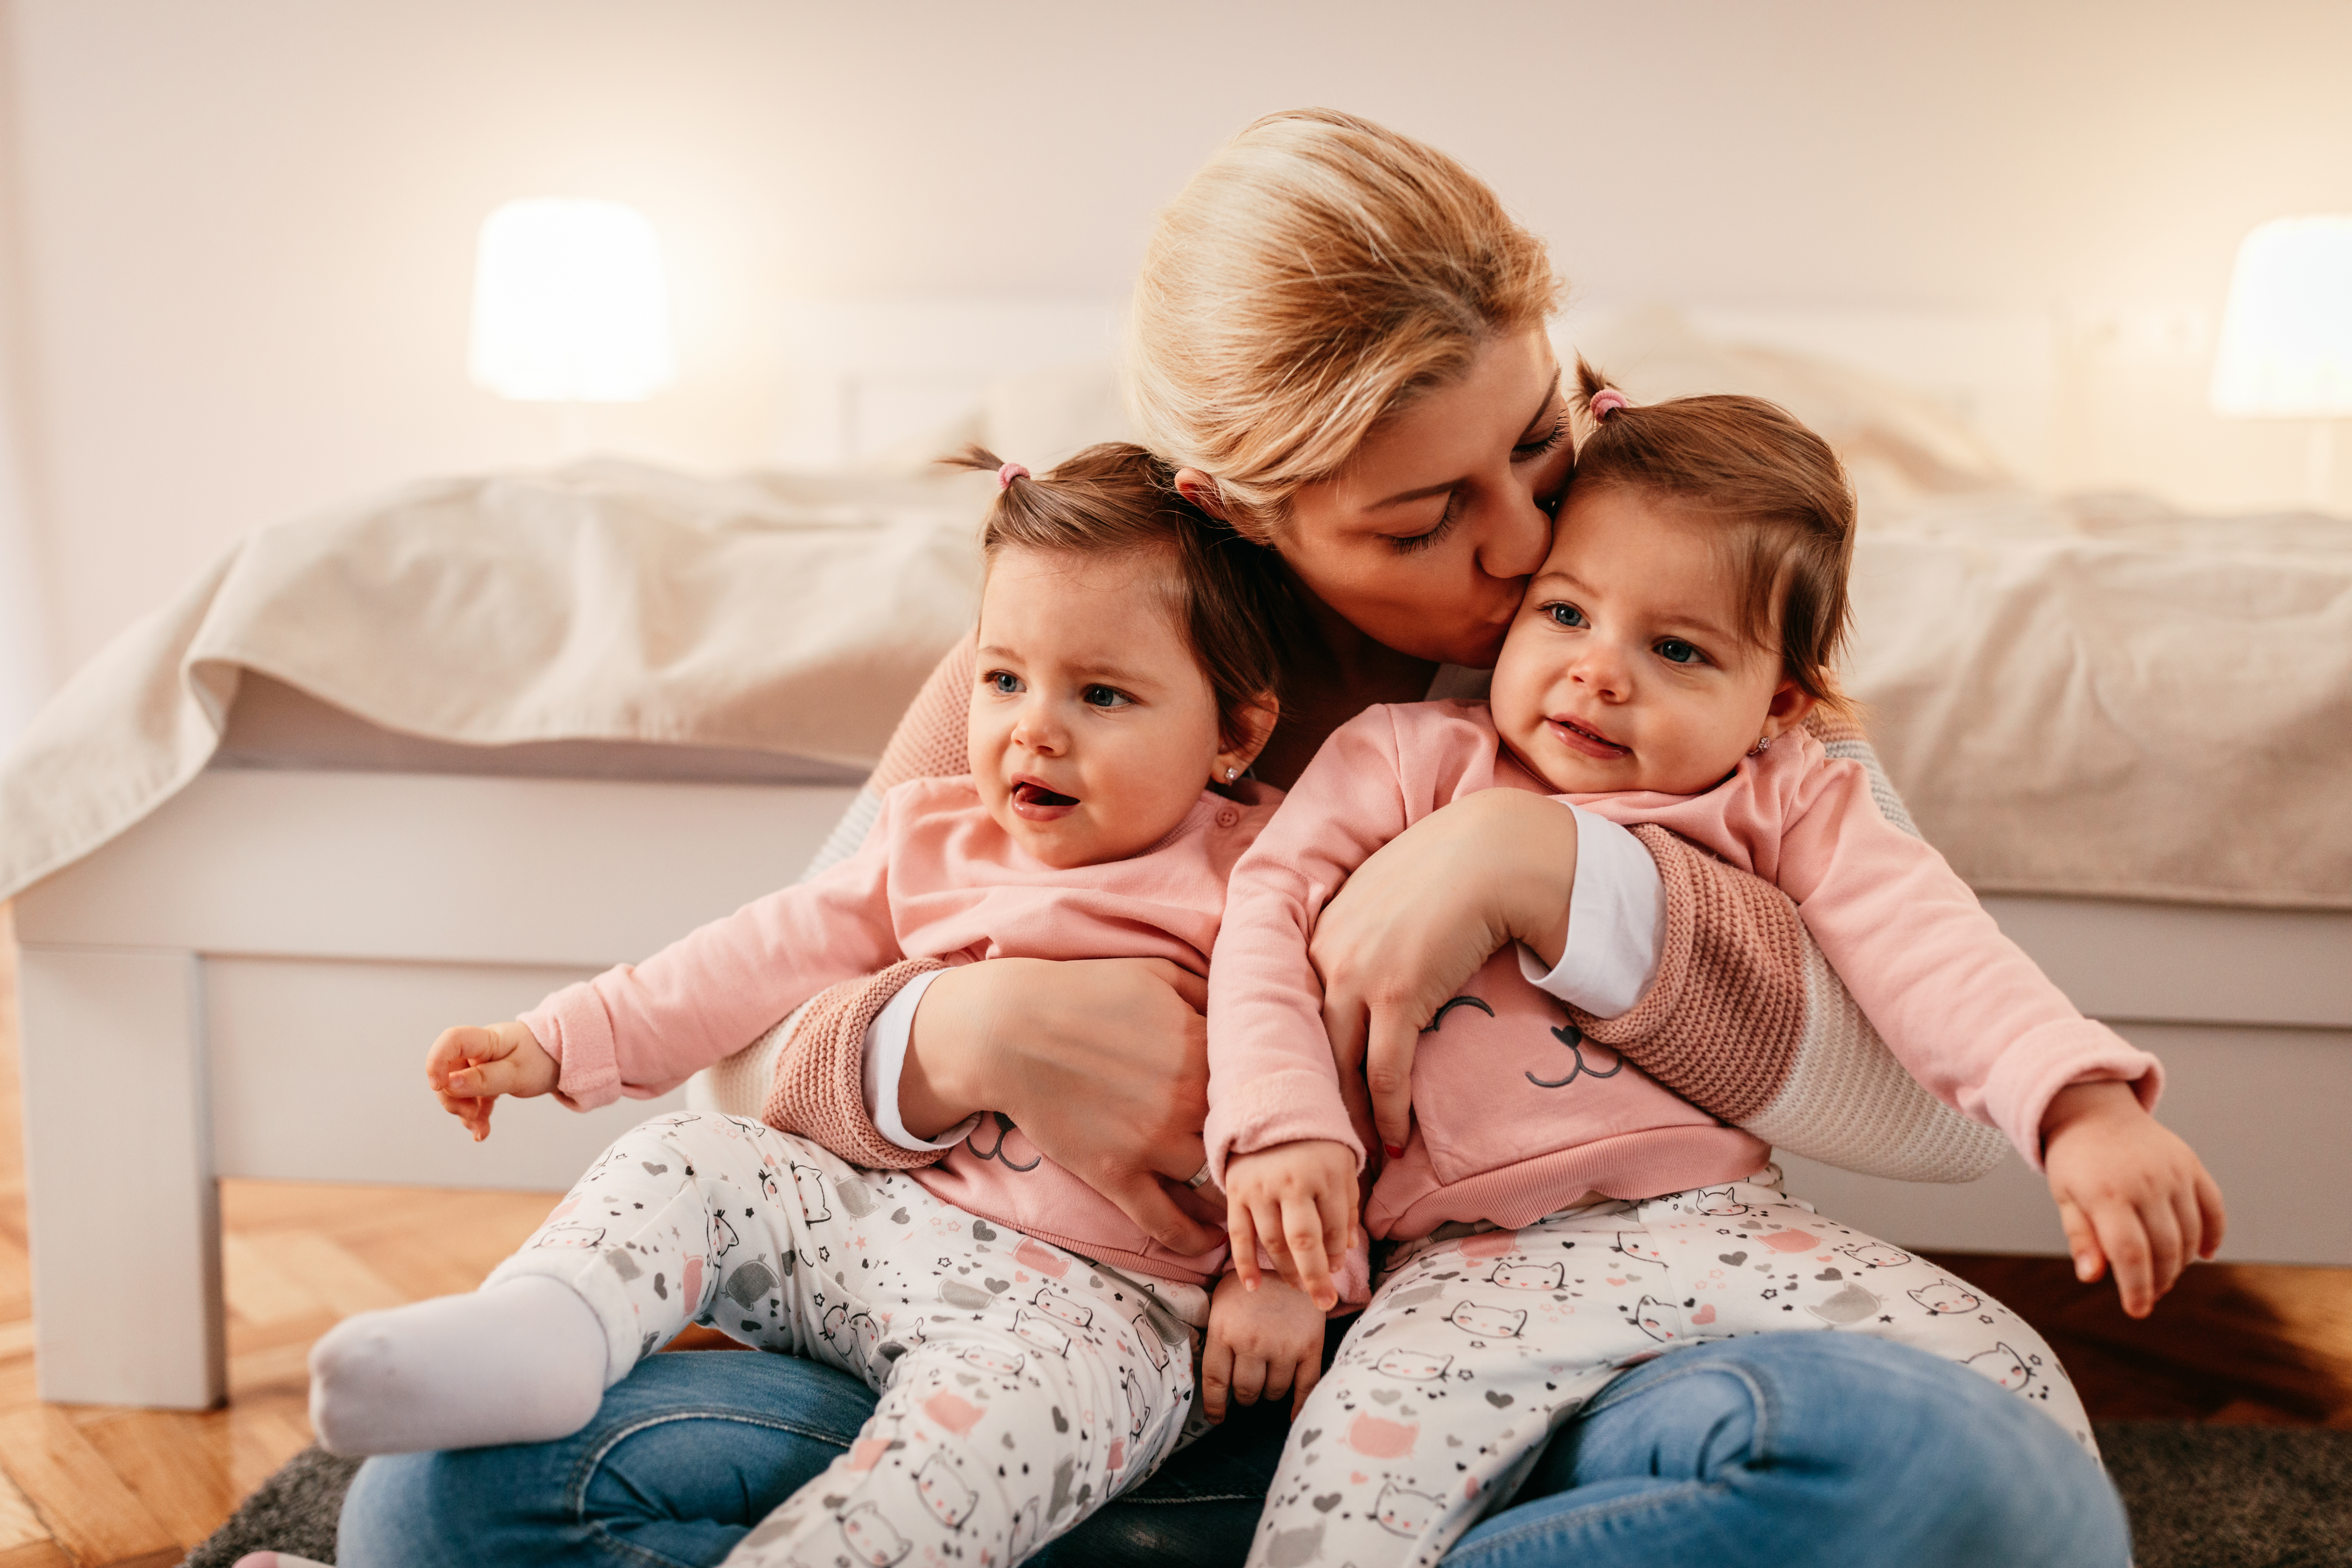 A mother with twin daughters | Source: Shutterstock